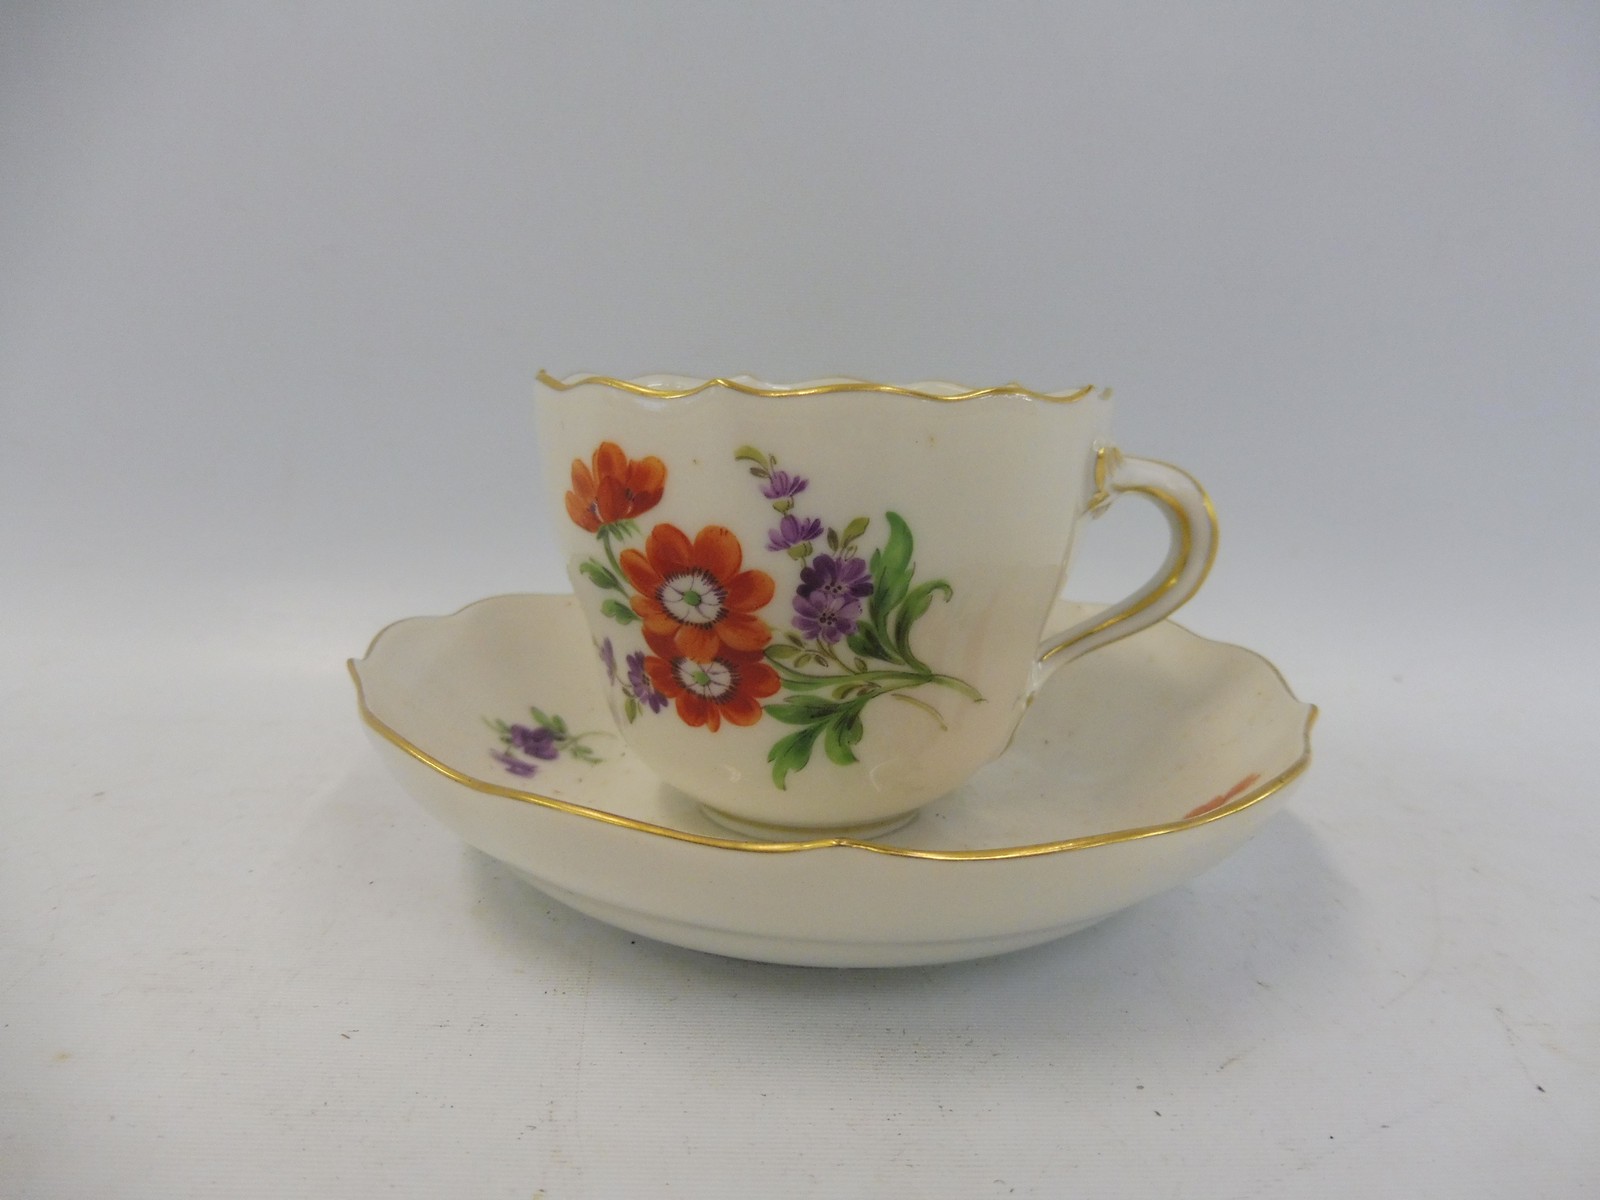 A 19th Century Continental porcelain cup and saucer, in the manner of Meissen, blue crossed swords